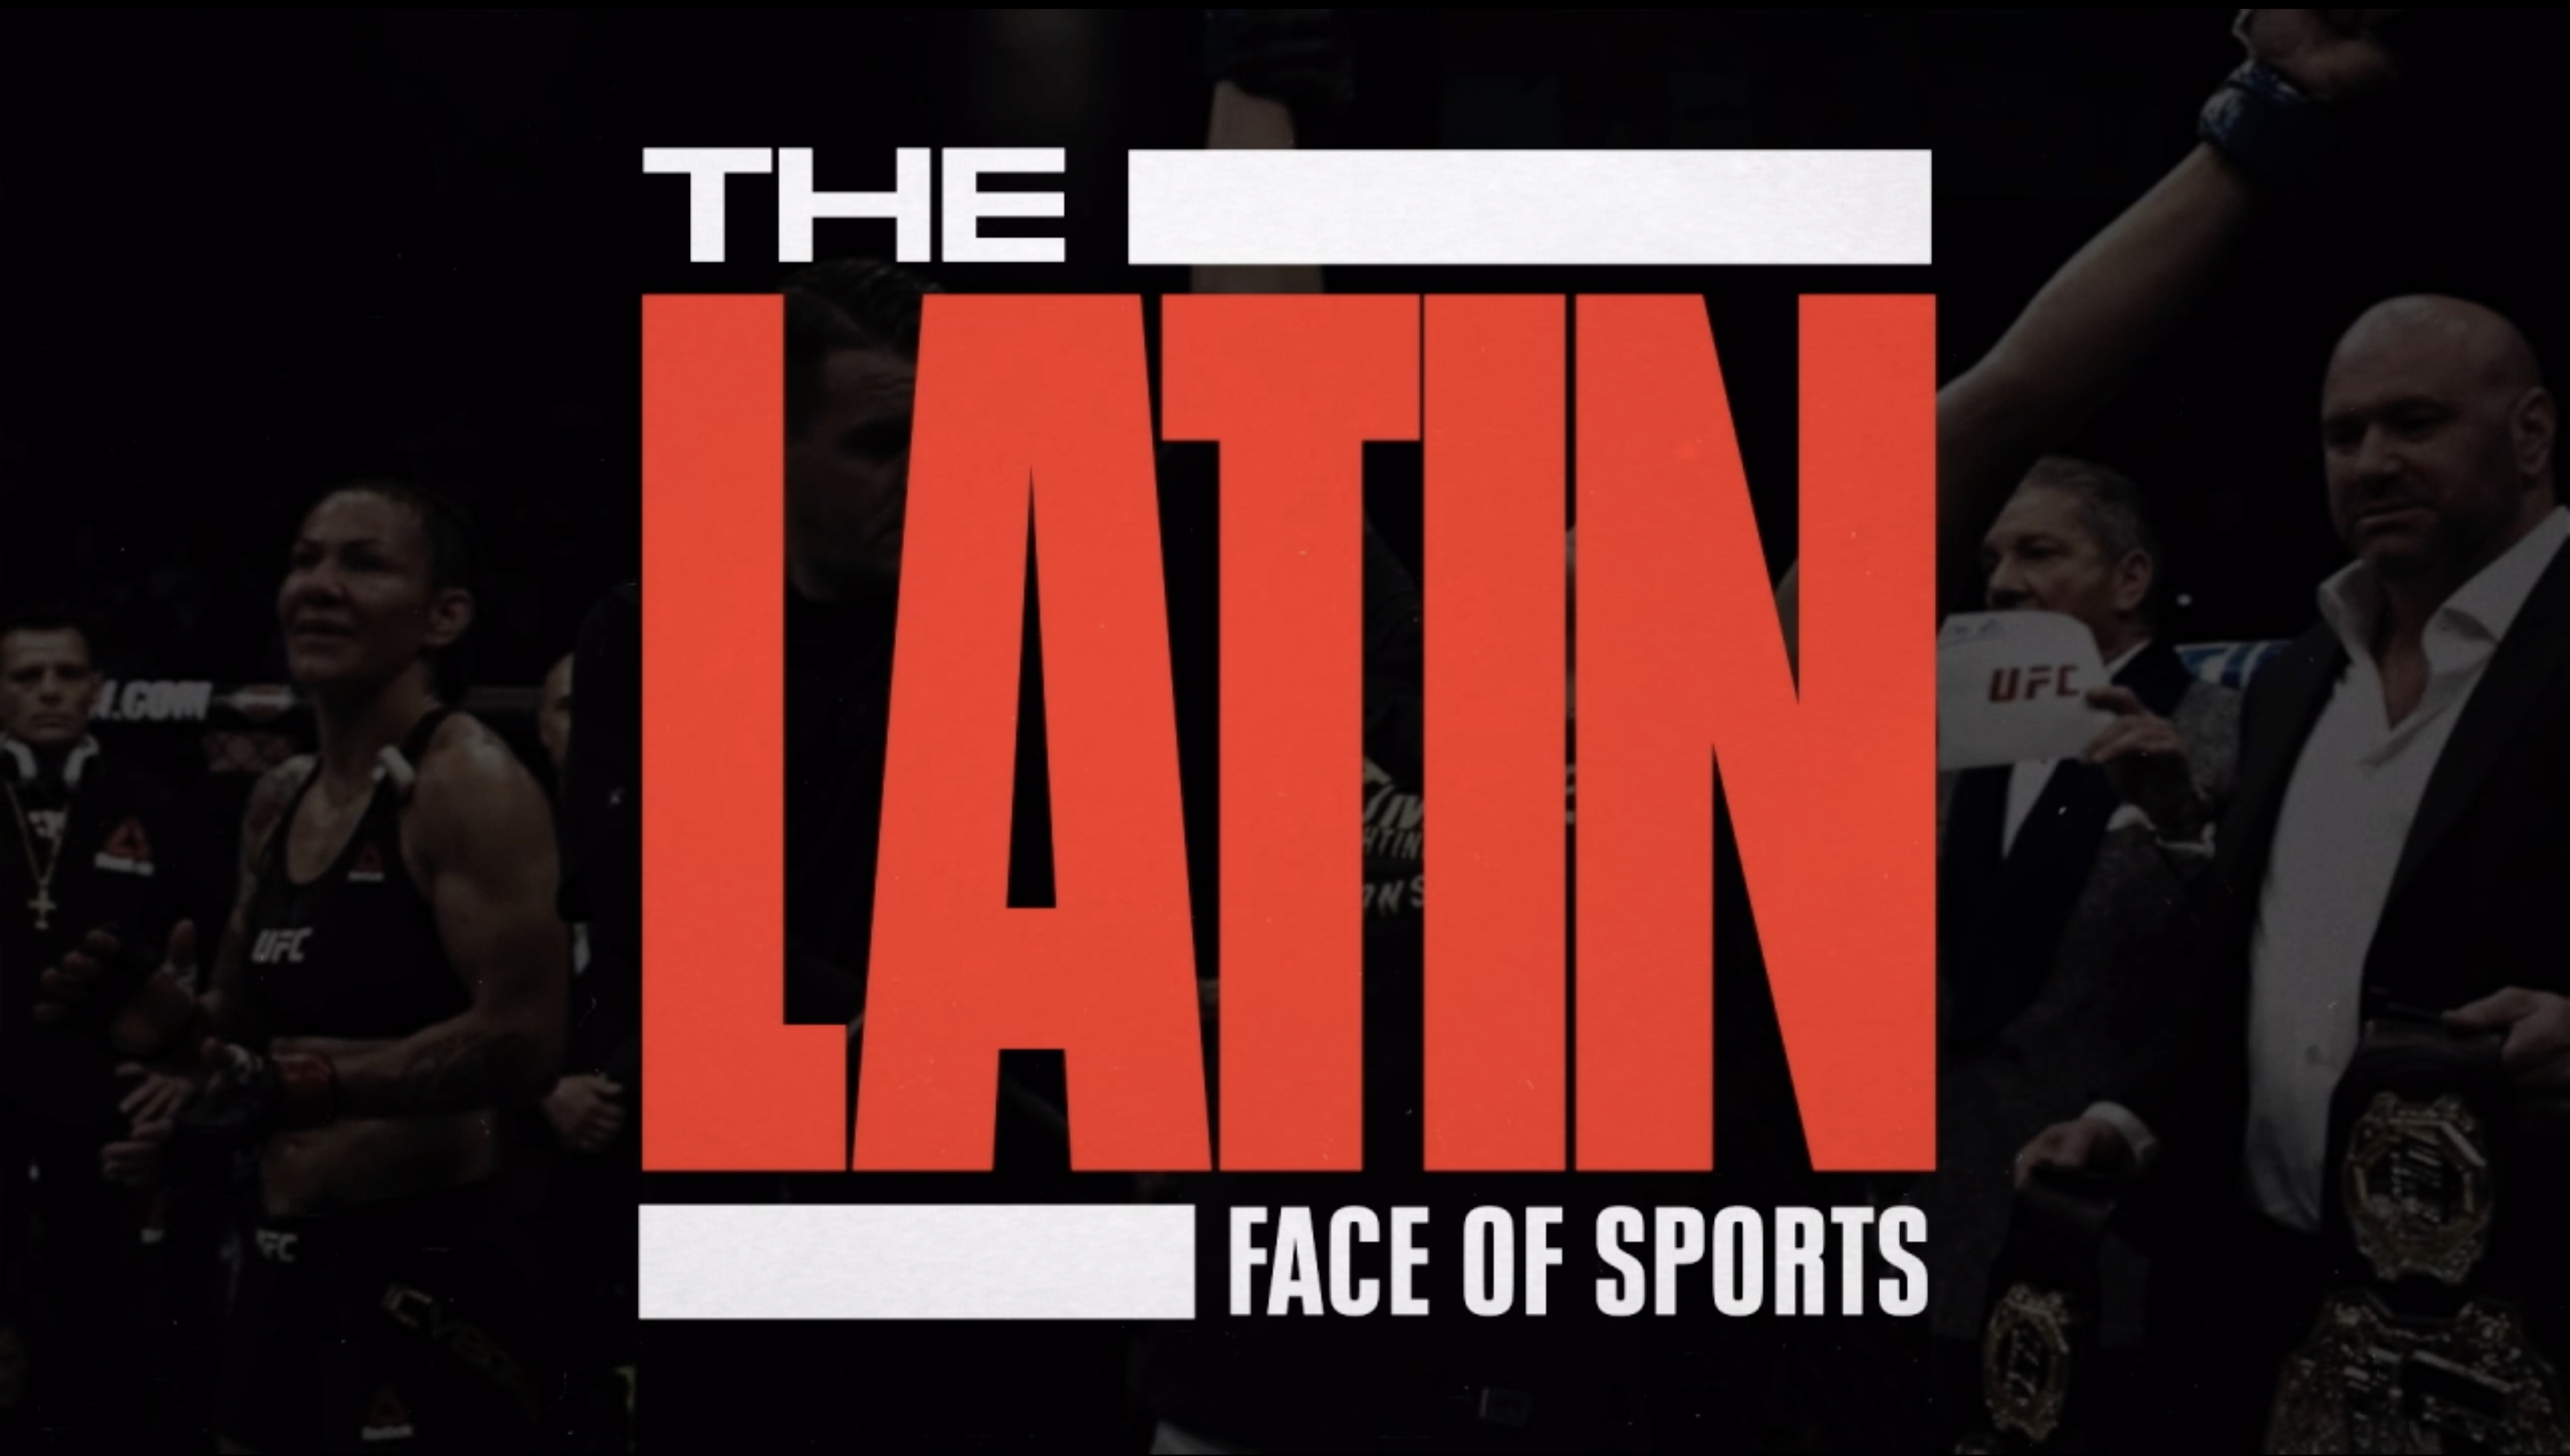 The Latin Face of Sports" text is prominently featured in white and red against a blurred background of athletes and officials in a mixed martial arts event.